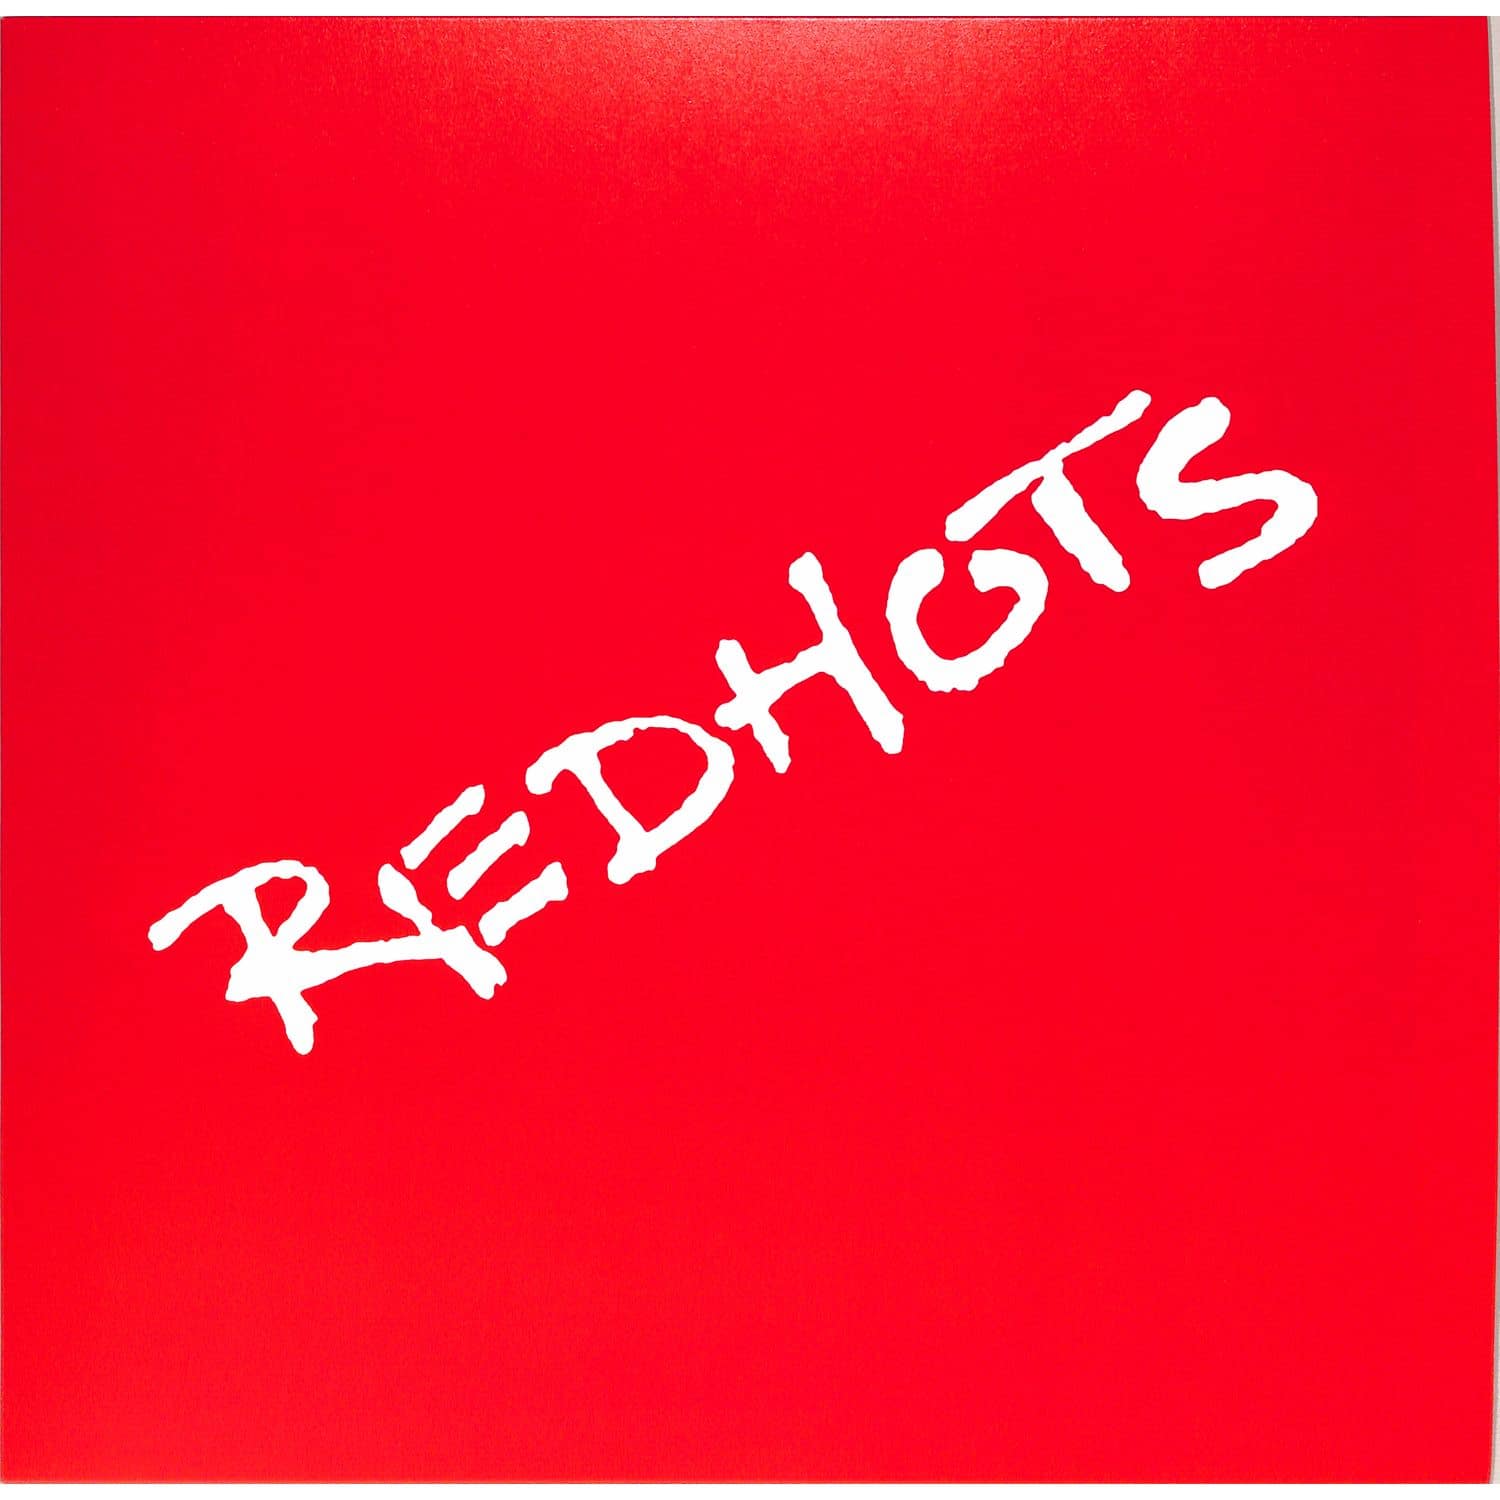 The Redhots - REDHOT